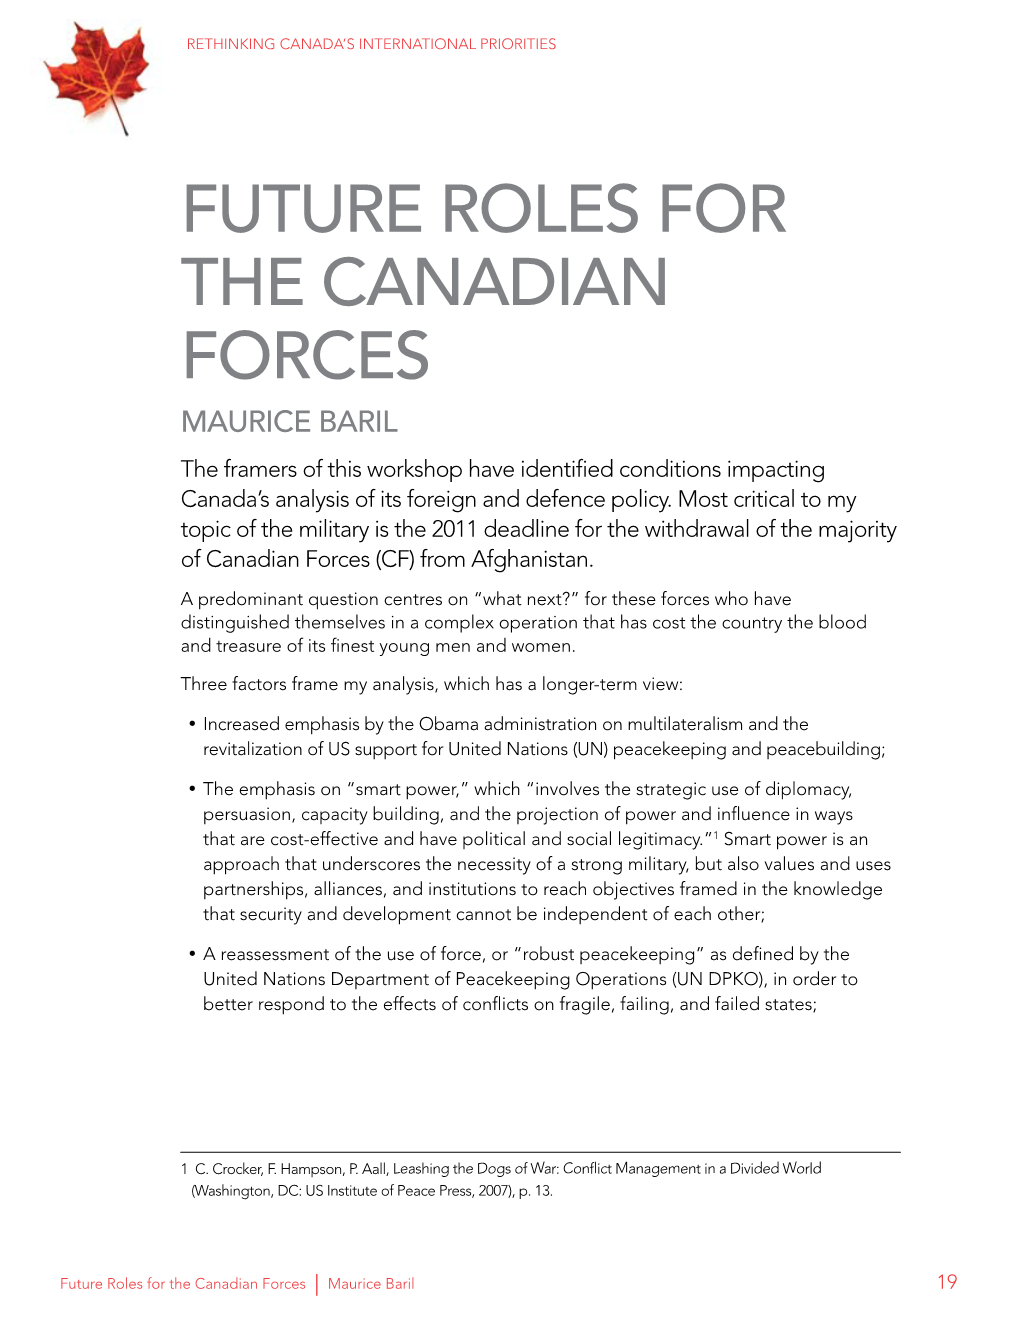 Future Roles for the Canadian Forces